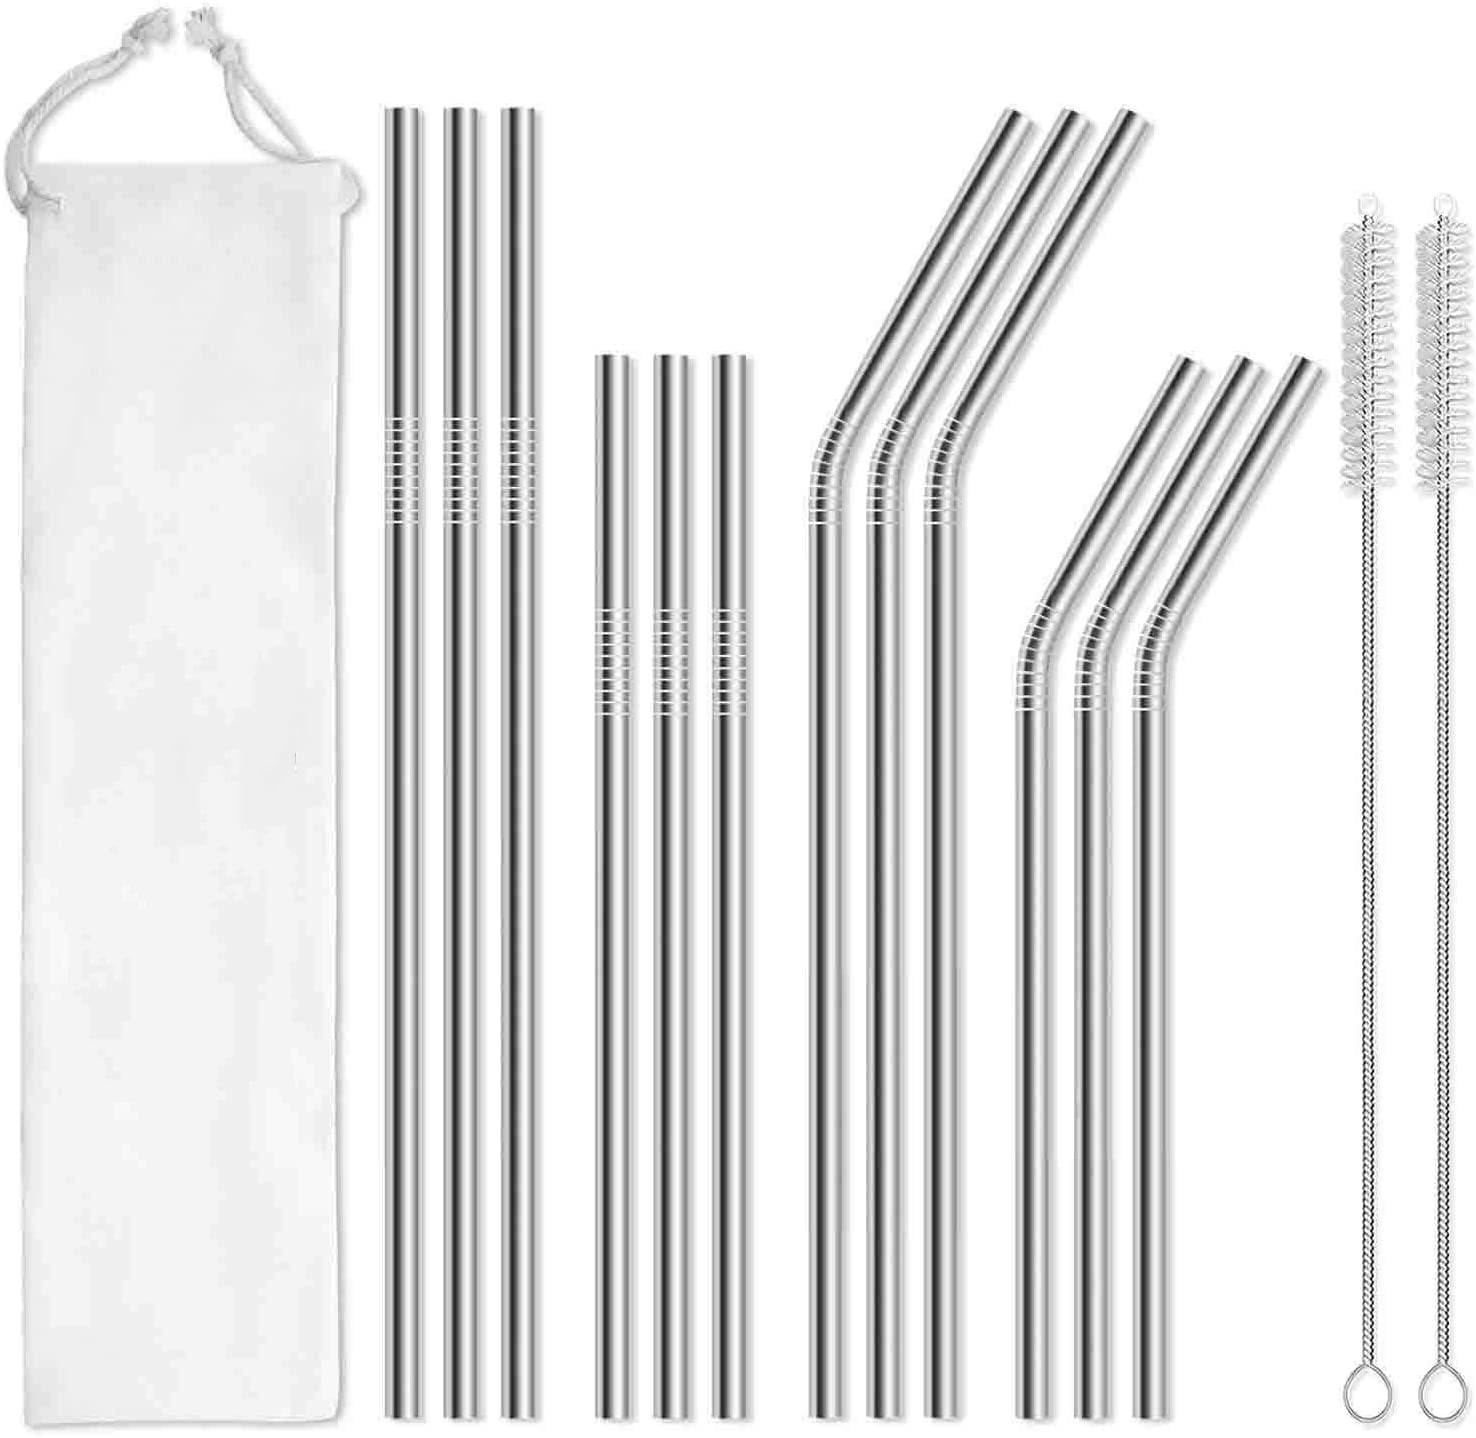 Stainless Steel Reusable Metal Drinking Straws with Case 